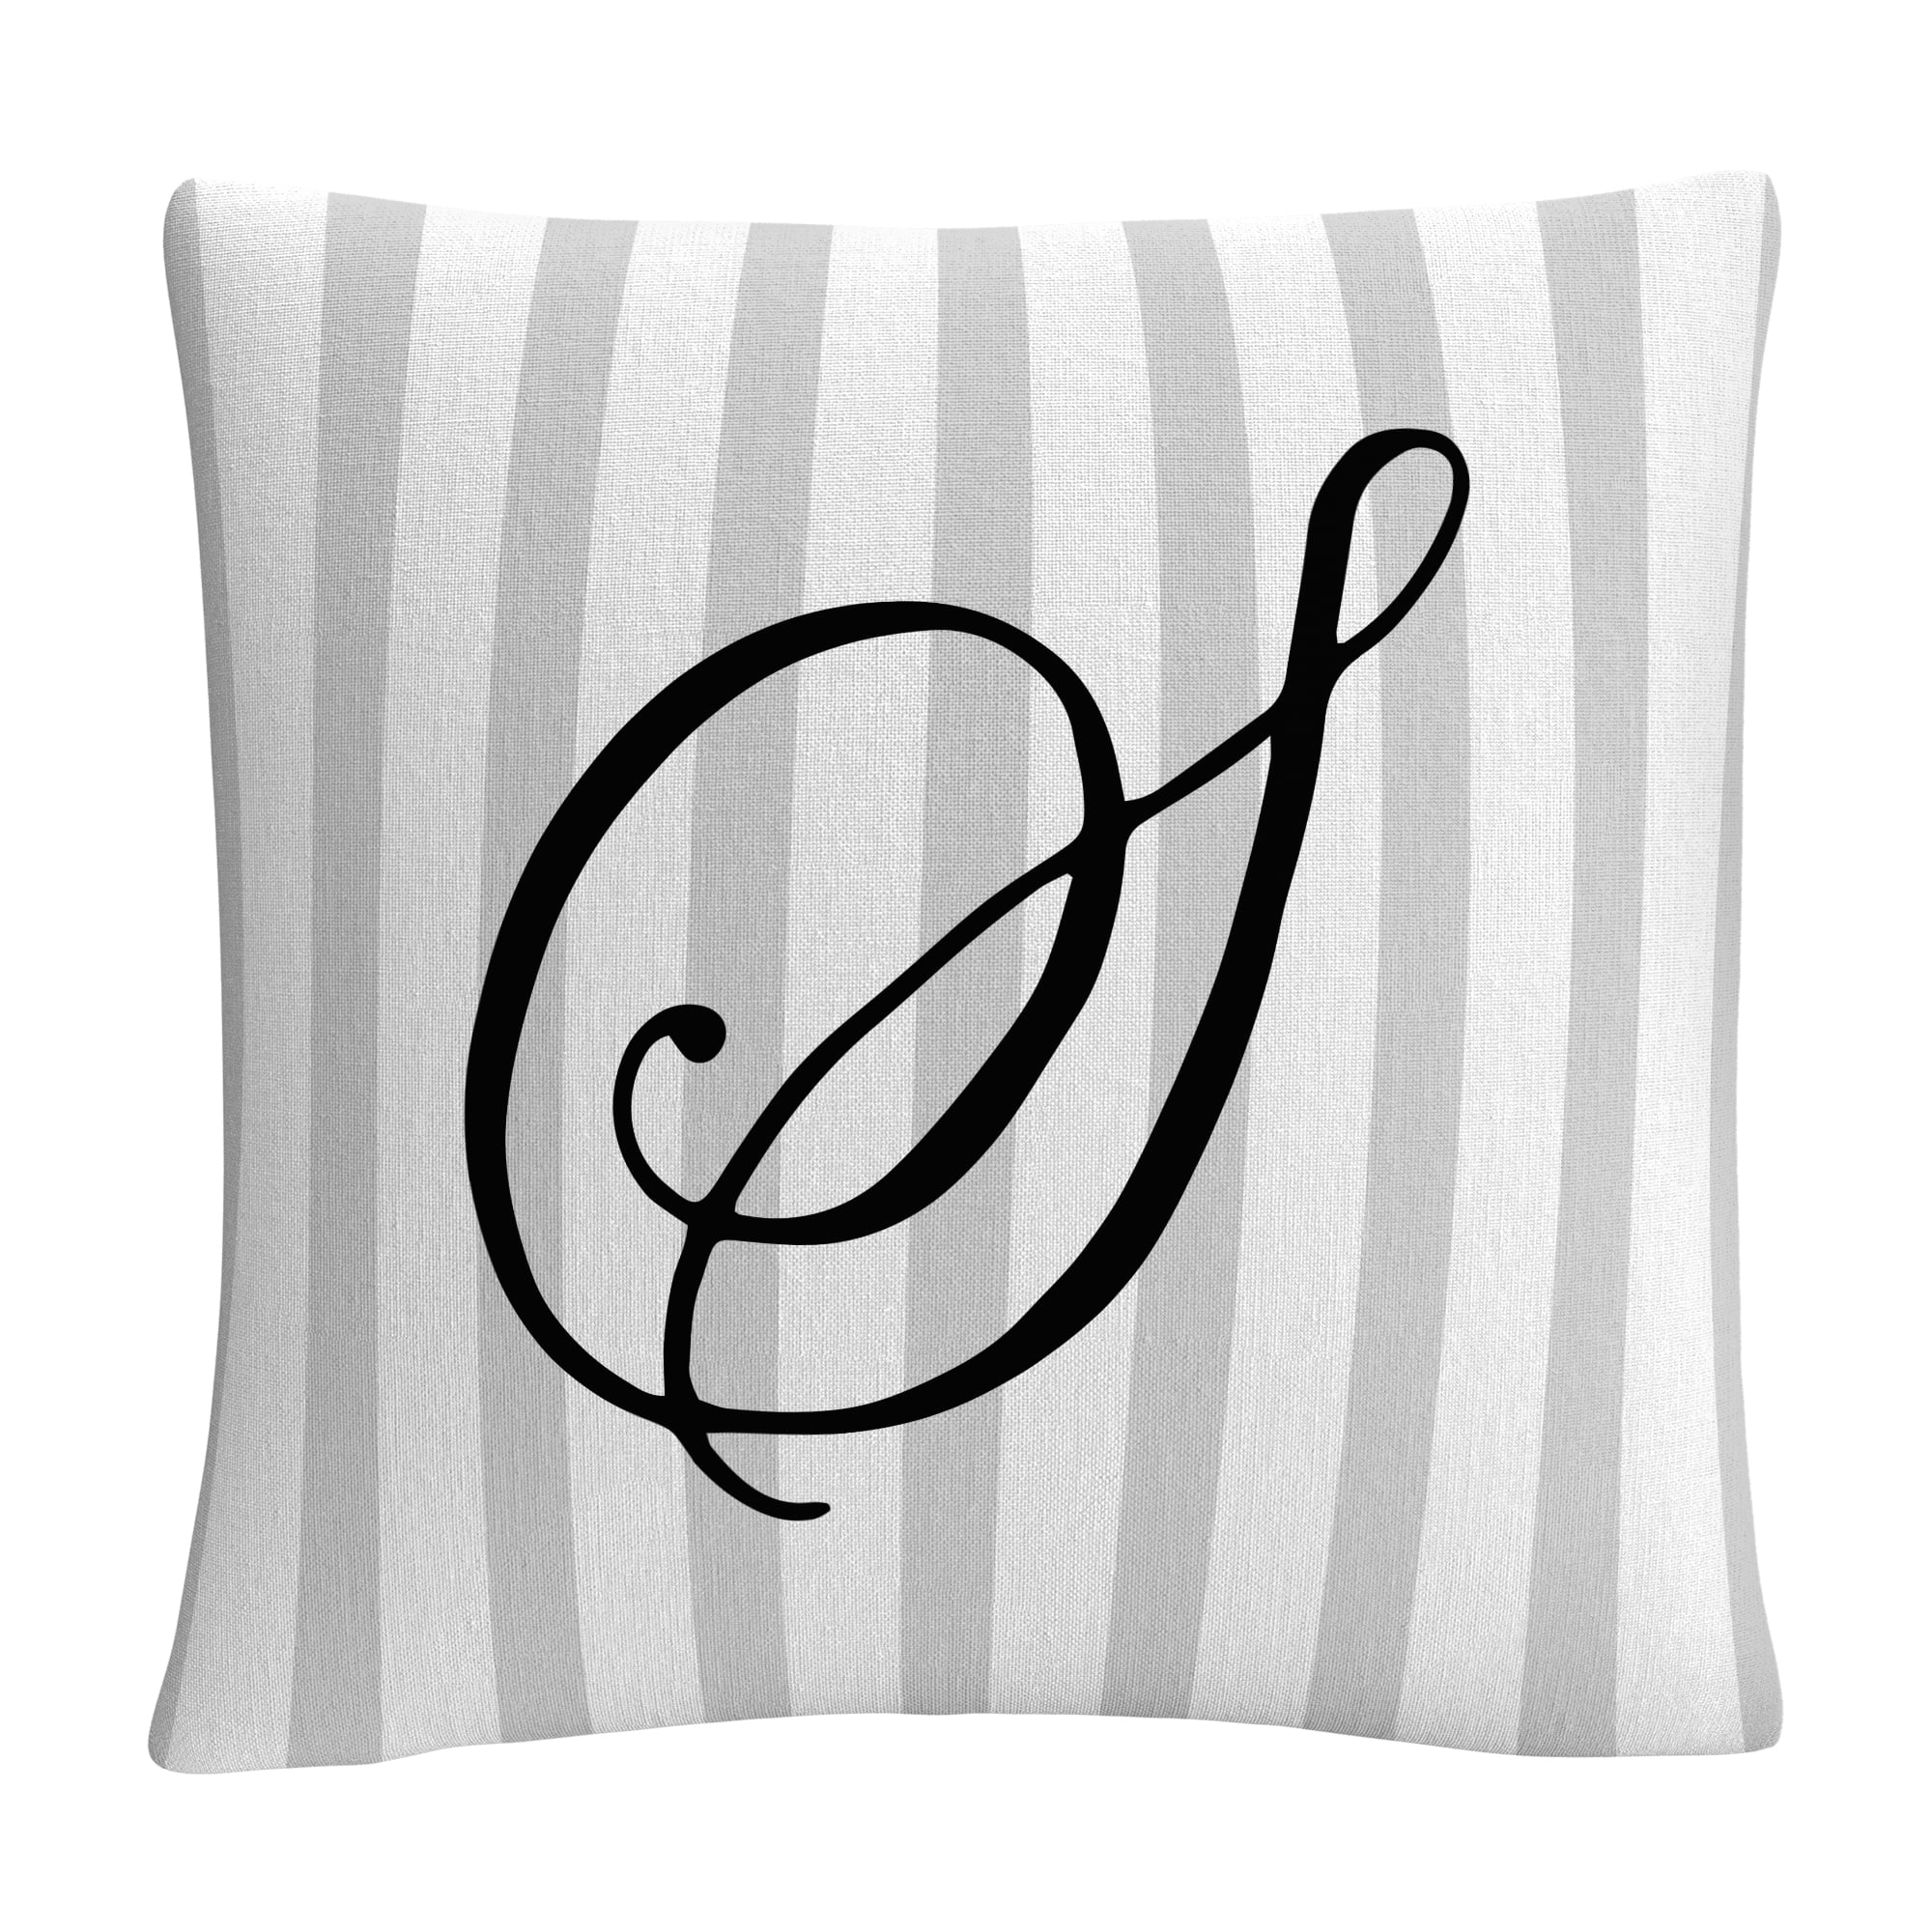 Multicolor Grass Leaves Monogram Letters Gifts Monogram Letter I Initial Grass Leaves Nature Decoration Throw Pillow 16x16 